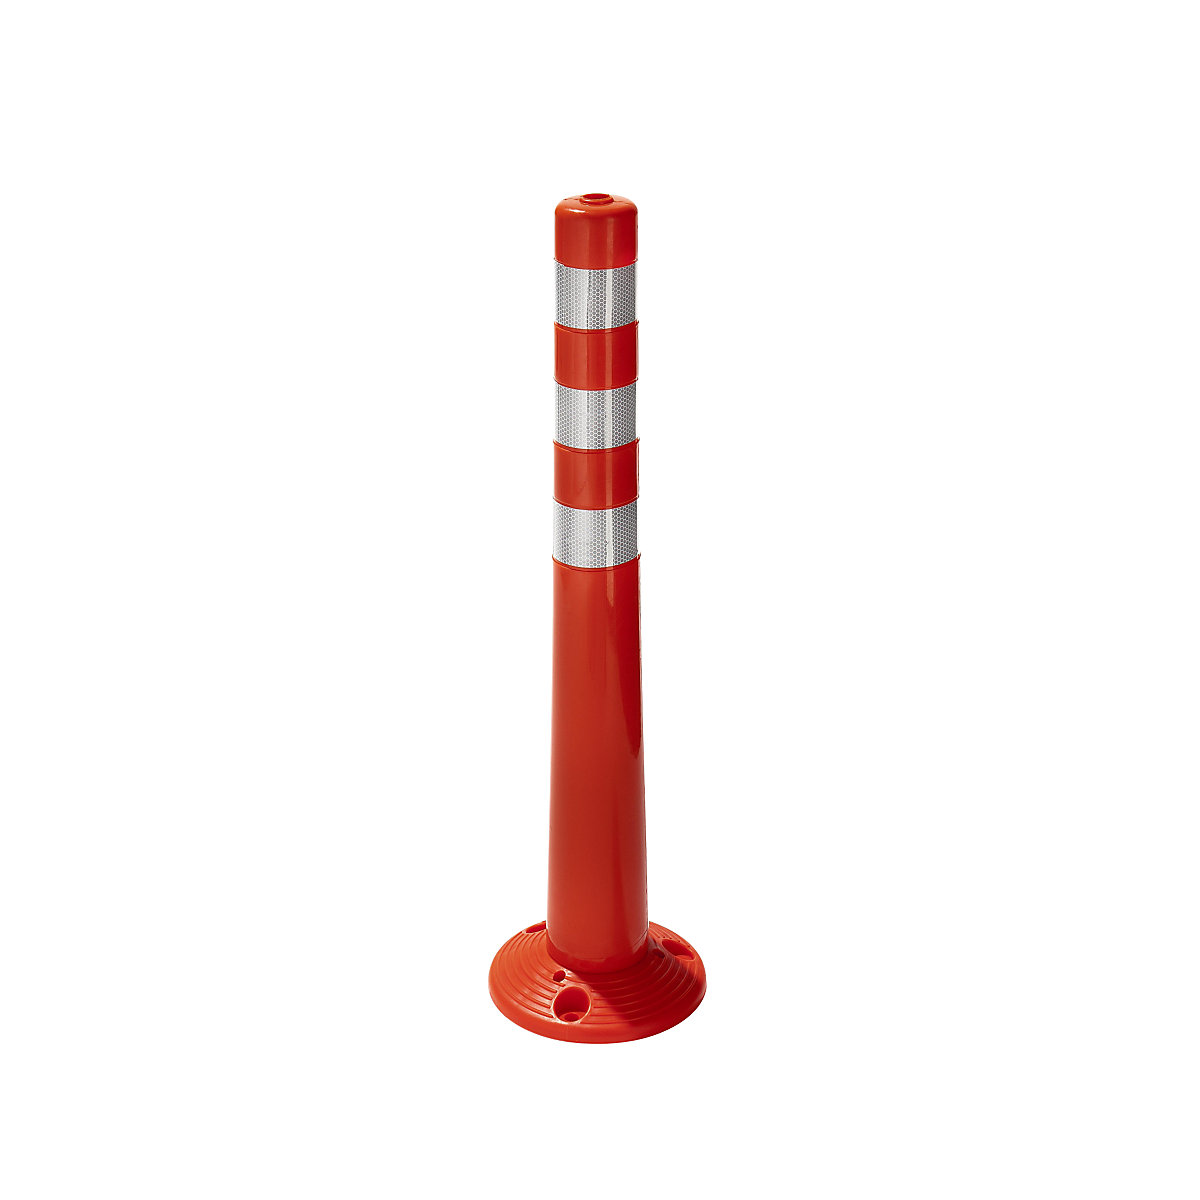 High visibility marking, bending, pack of 2